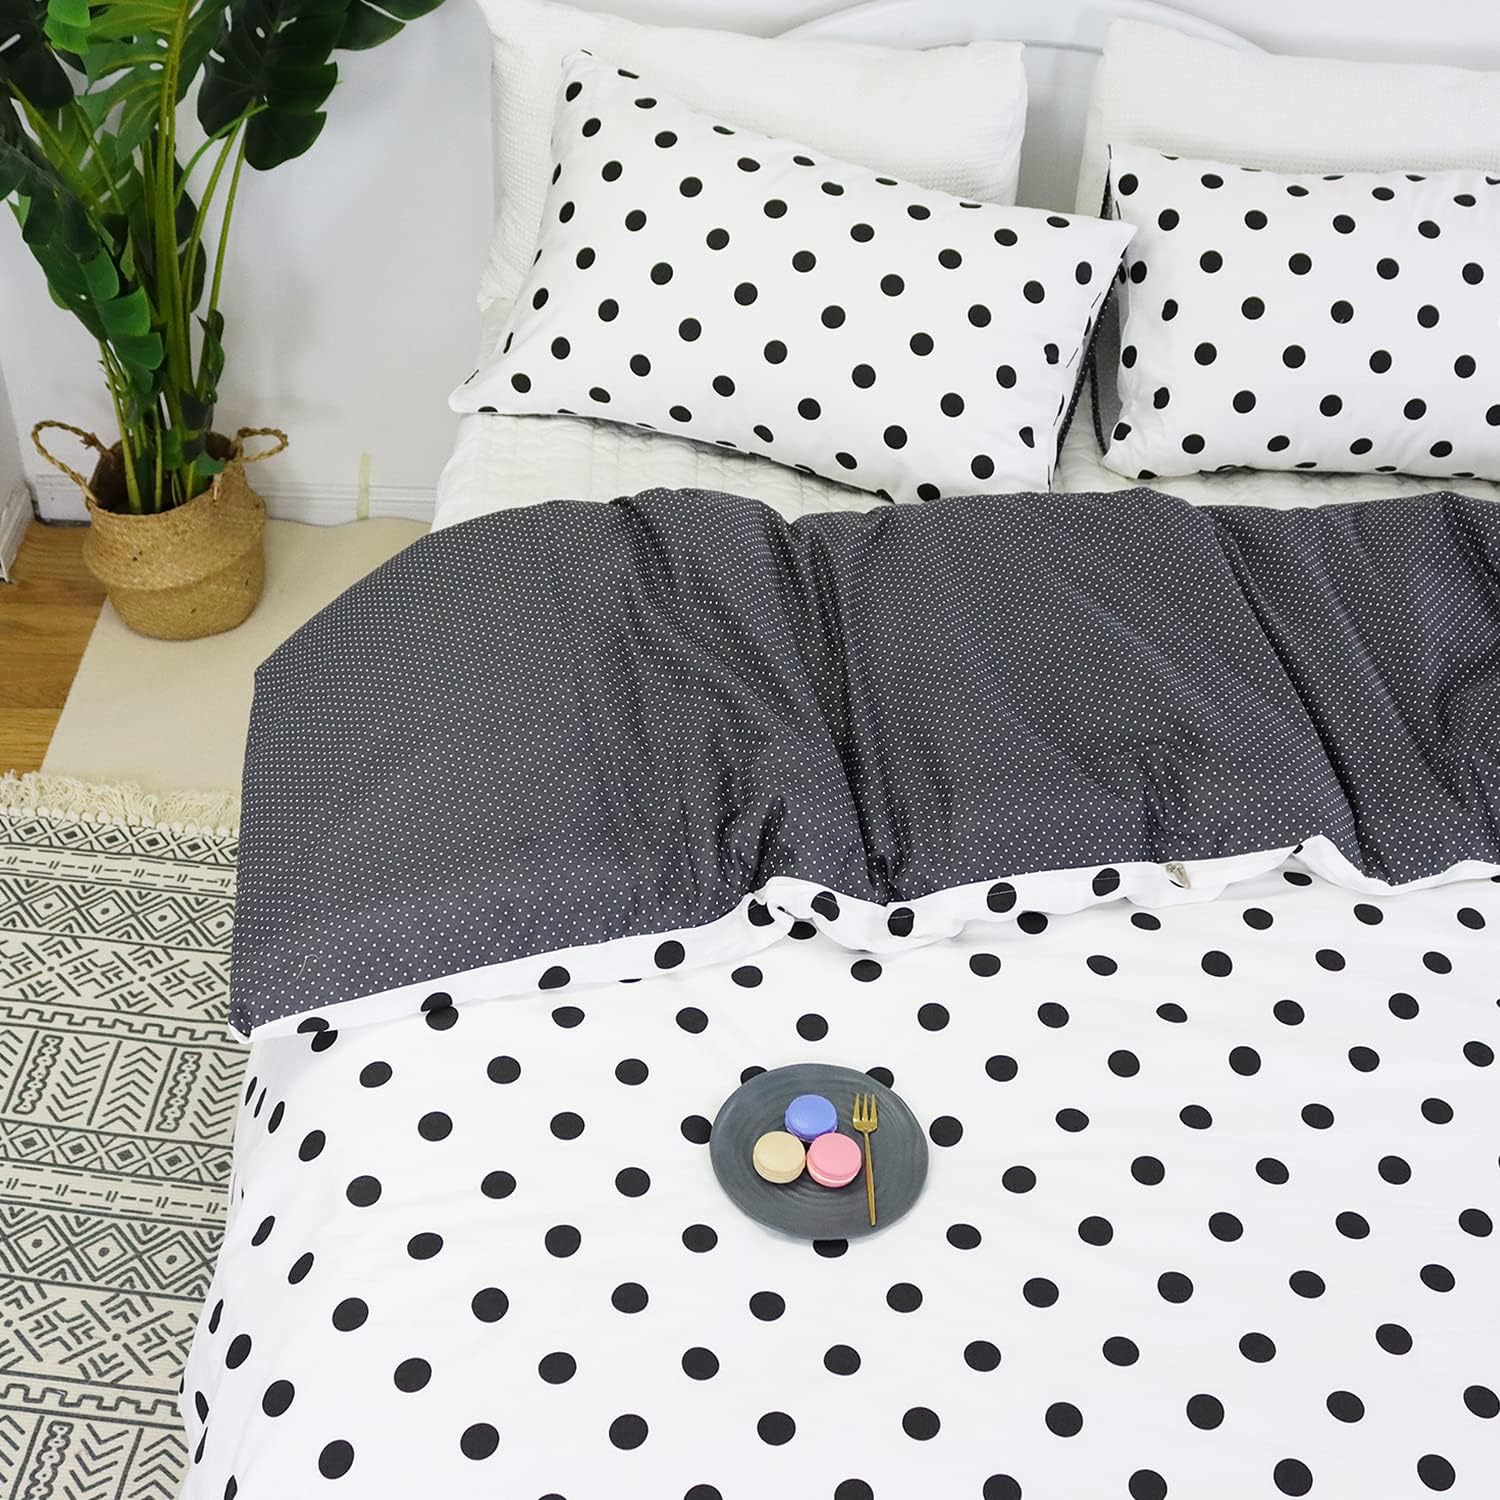 FADFAY Polka Dots Patterned Duvet Cover Set Full Size 100% Cotton Black and White Bedding Reversible Grey Zipper Comforter Cover Luxury Soft Breathable Circle Geometric Modern Bedding 3Pcs, Full